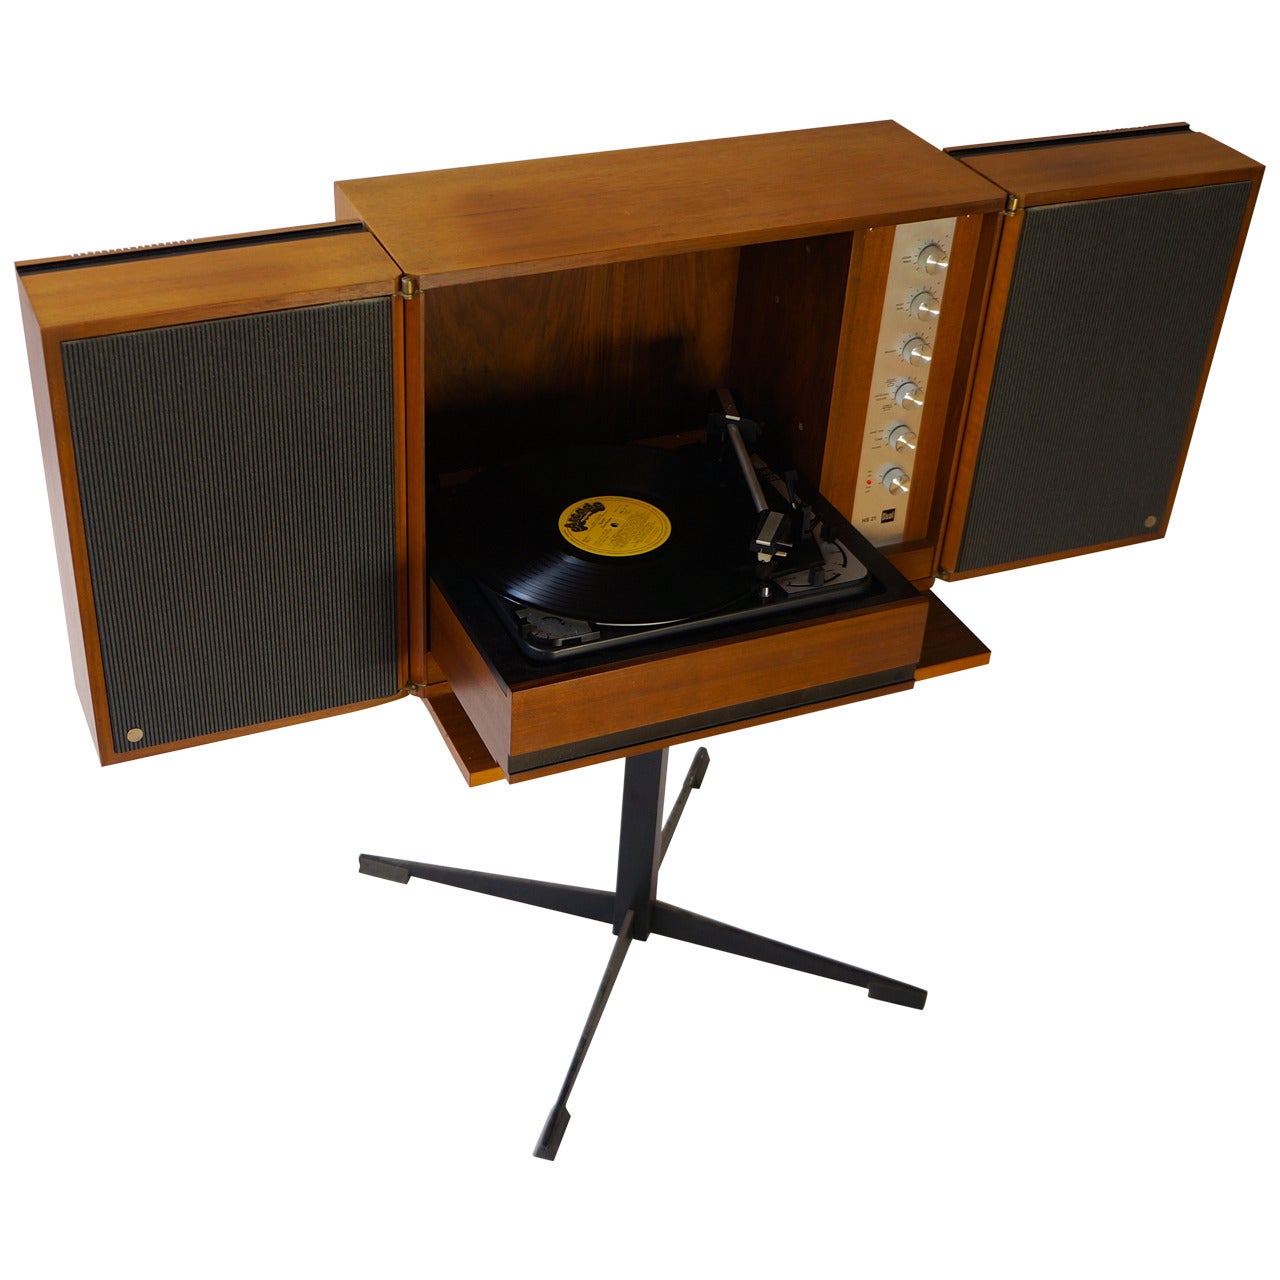 Dual type HS21 record player, Germany, 1966